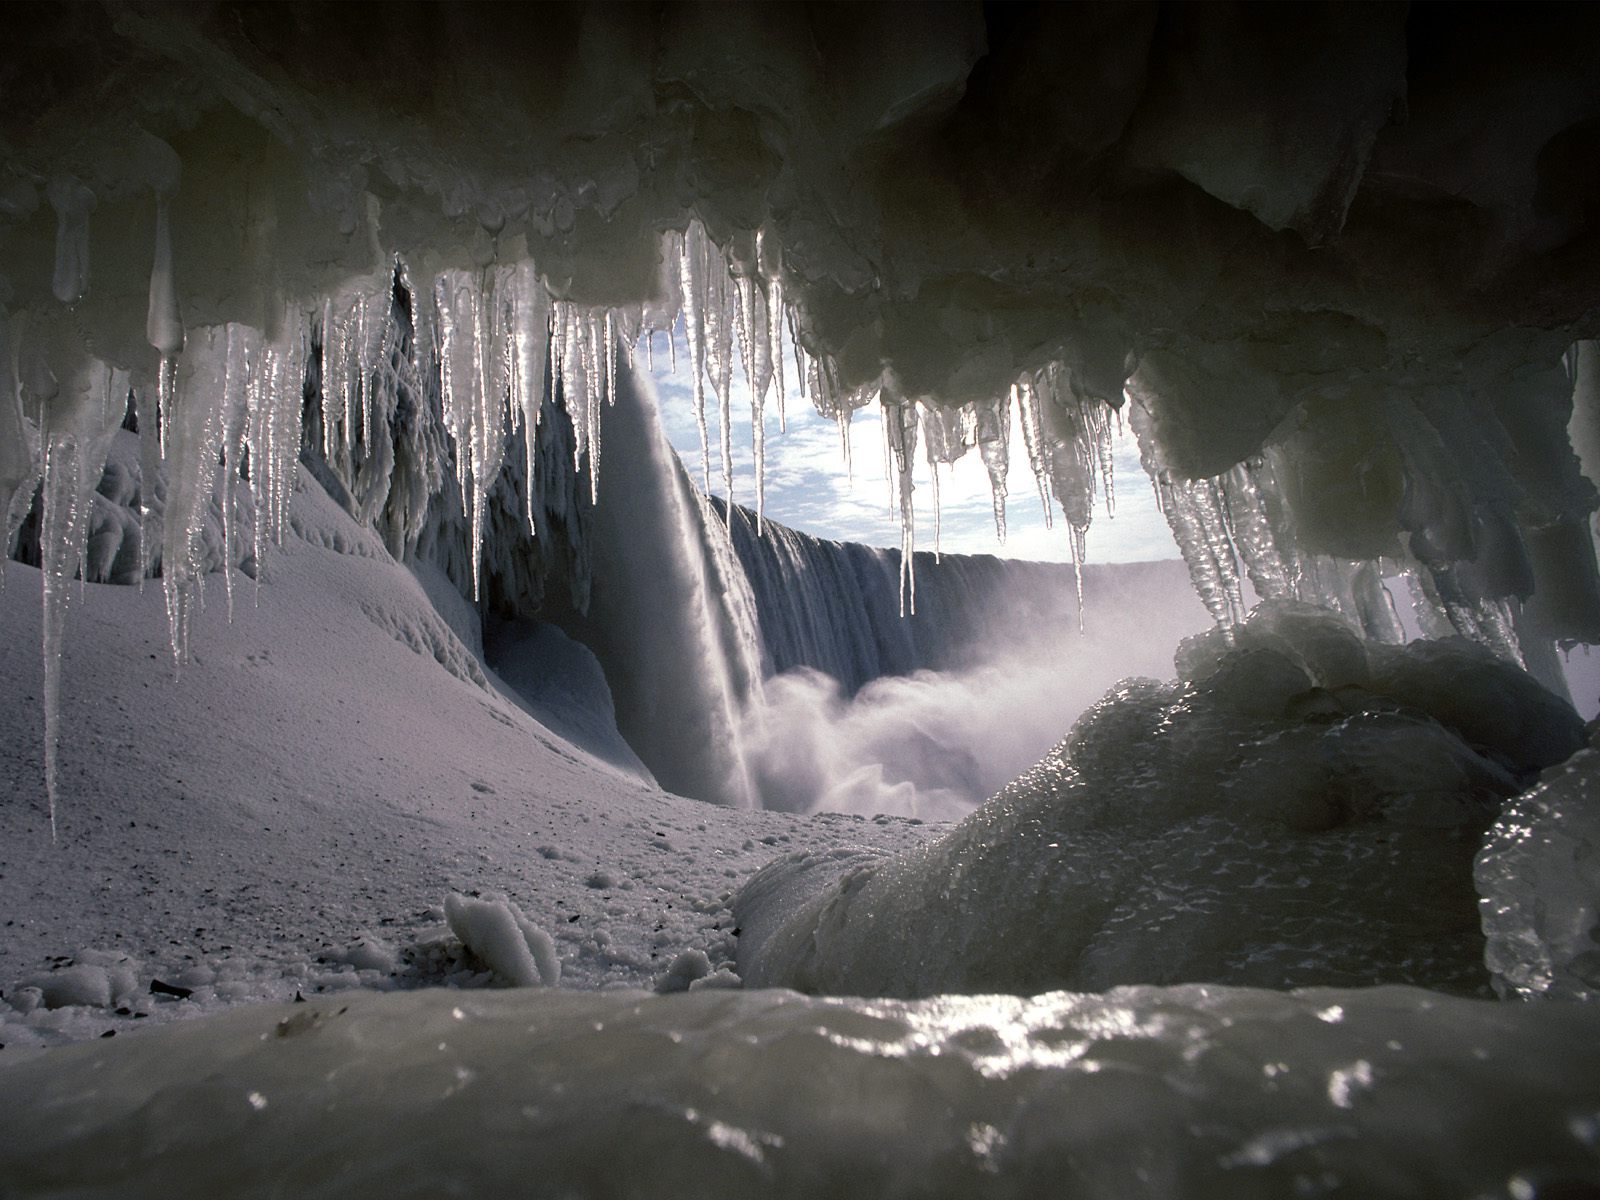 cave wallpapers hd Ice Cave Wallpapers HD in high quality wallpaper 1600x1200